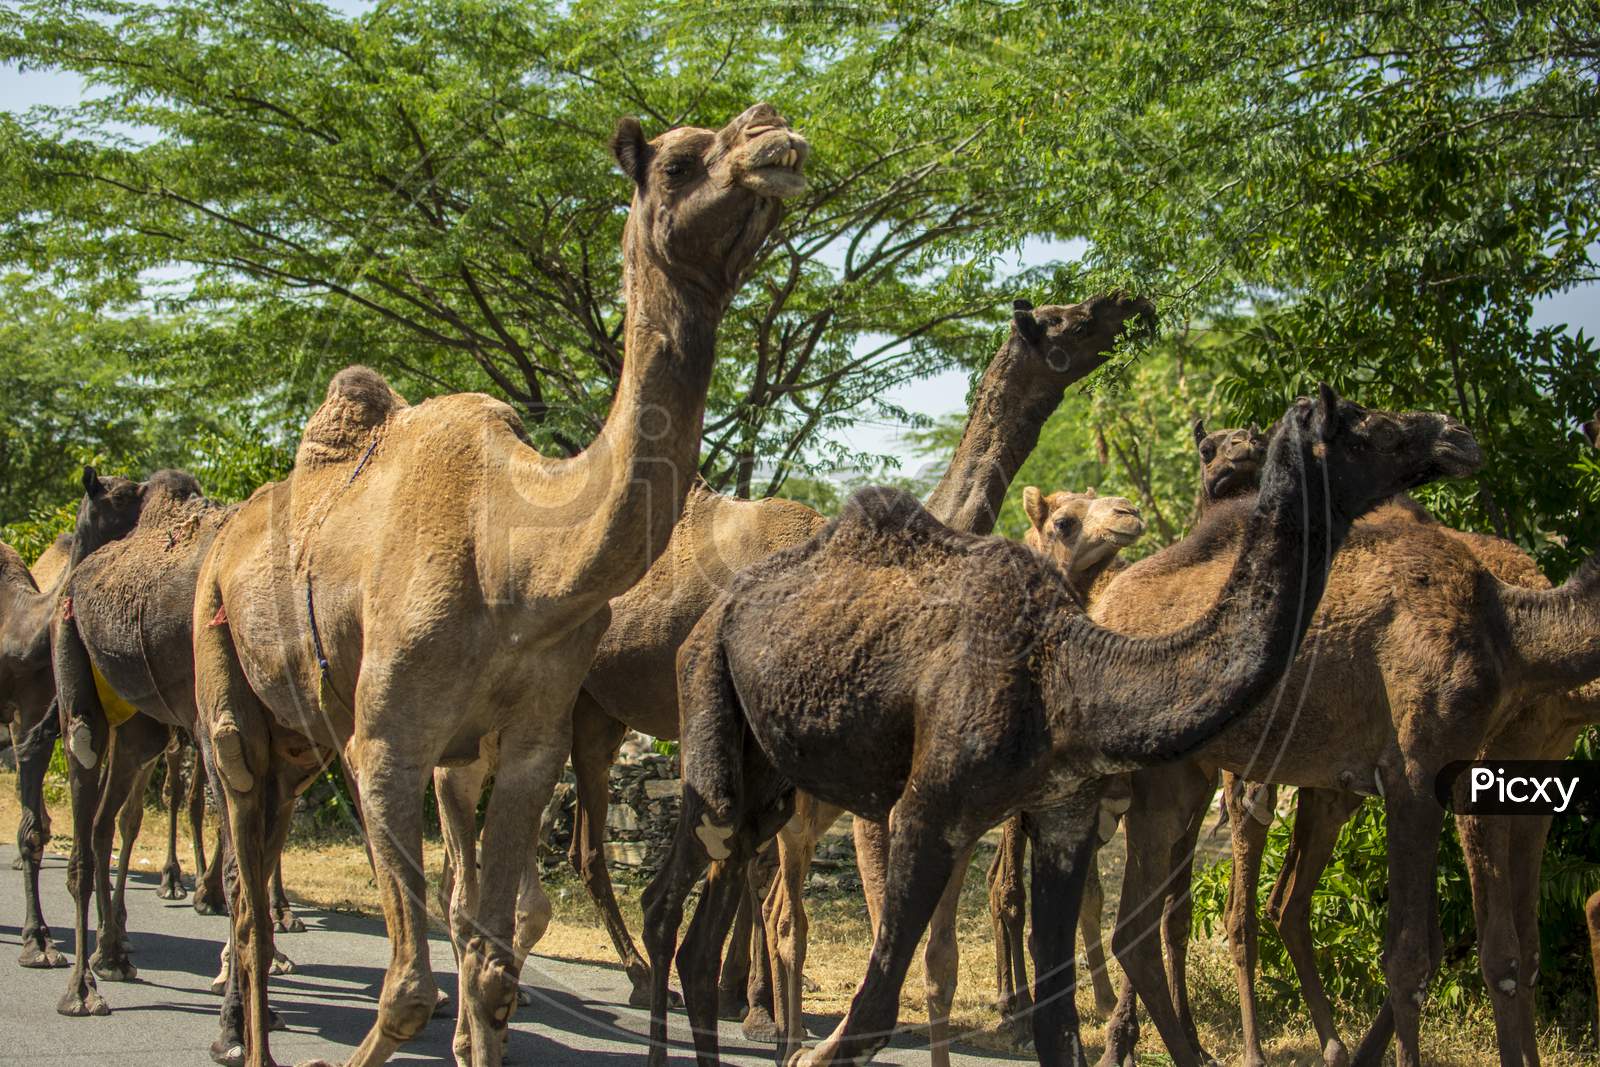 The Camel Is Part Of The Landscape Of Rajasthan; The Icon Of The Desert State, Part Of Its Cultural Identity, And An Economically Important Animal For Desert Communities